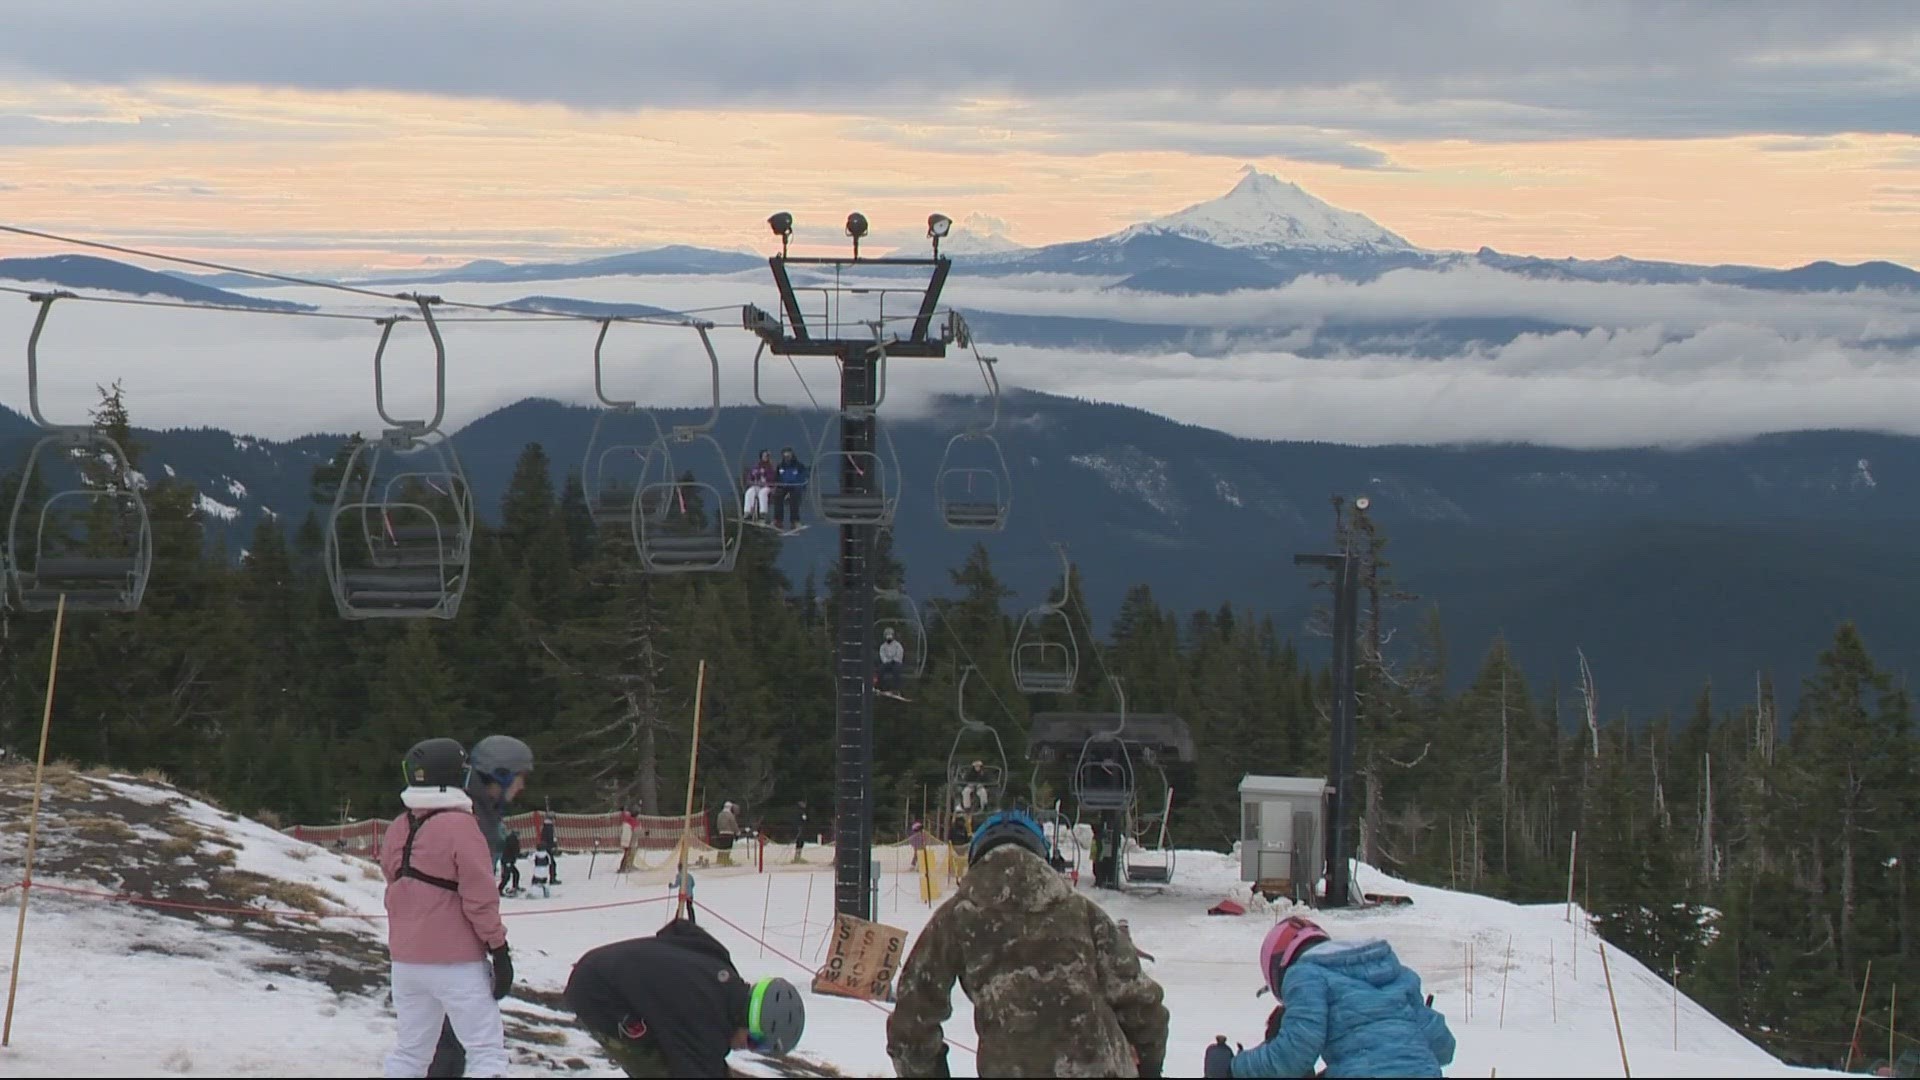 Some skiers and snowboarders are still braving the slopes on Mount Hood, despite conditions that are less than ideal. Snow hasn’t been sticking around.